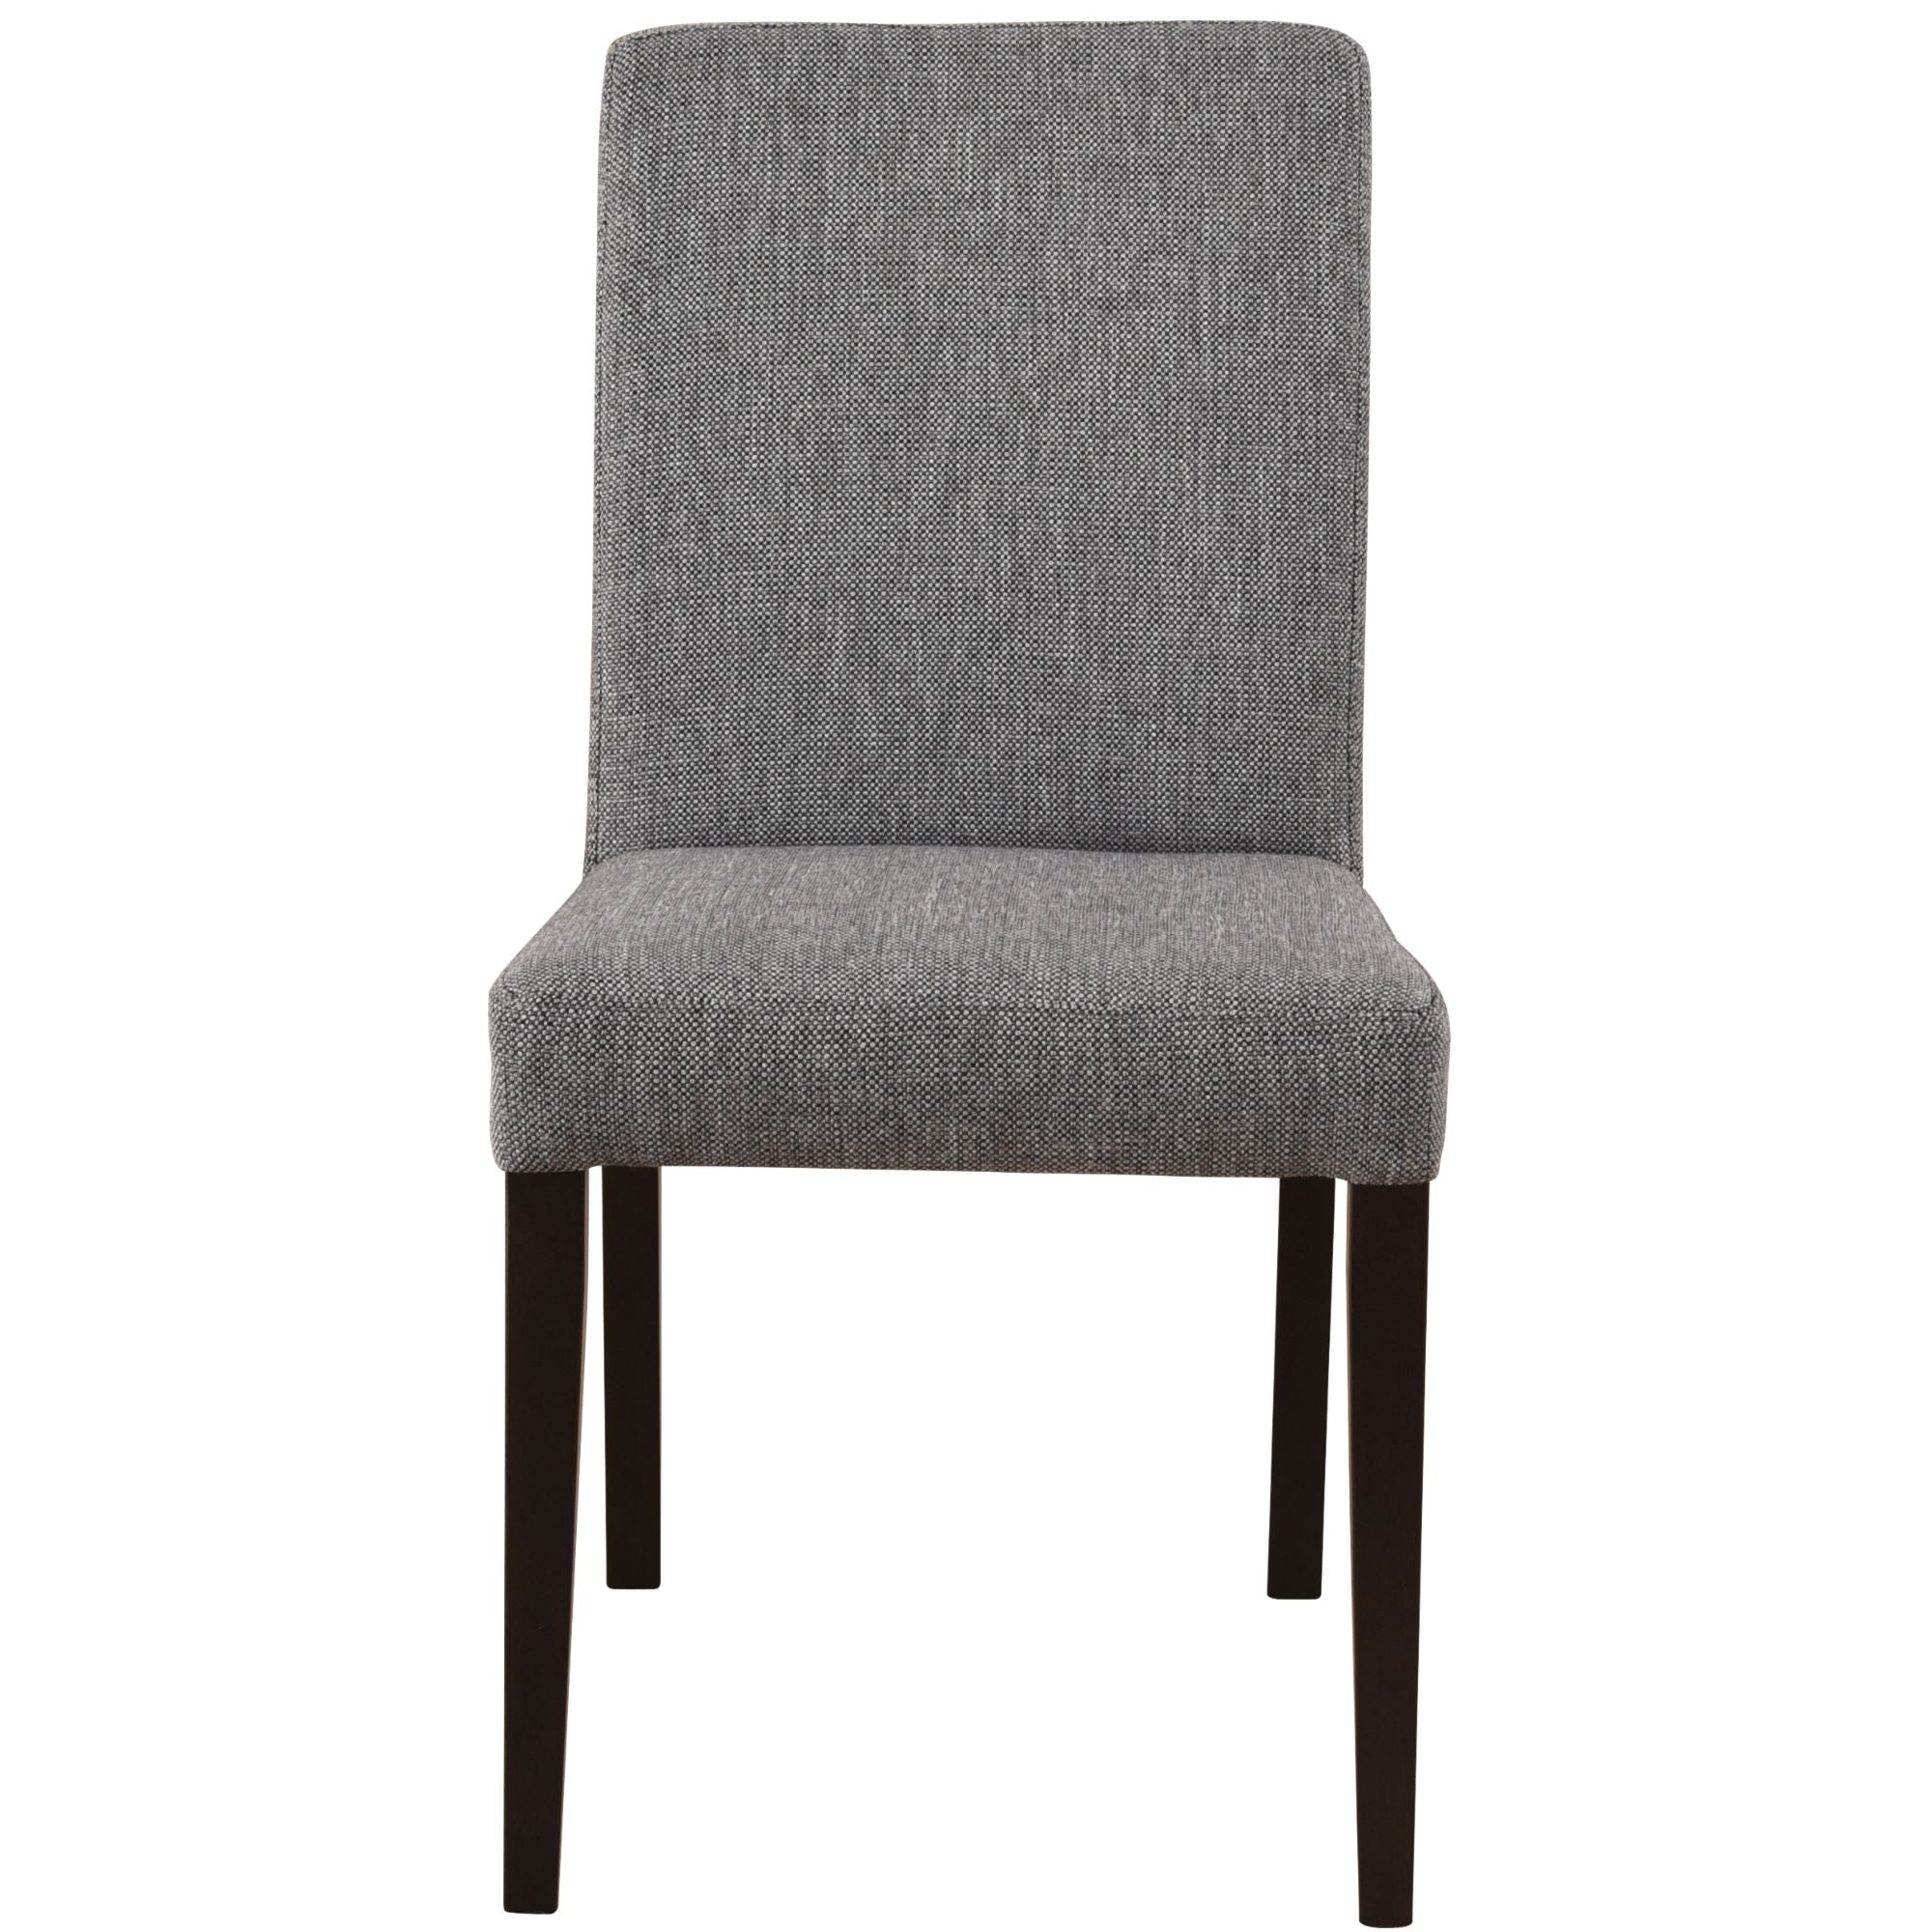 Dining Chair Set of 4 Fabric Upholstered Solid Acacia Wood - Granite